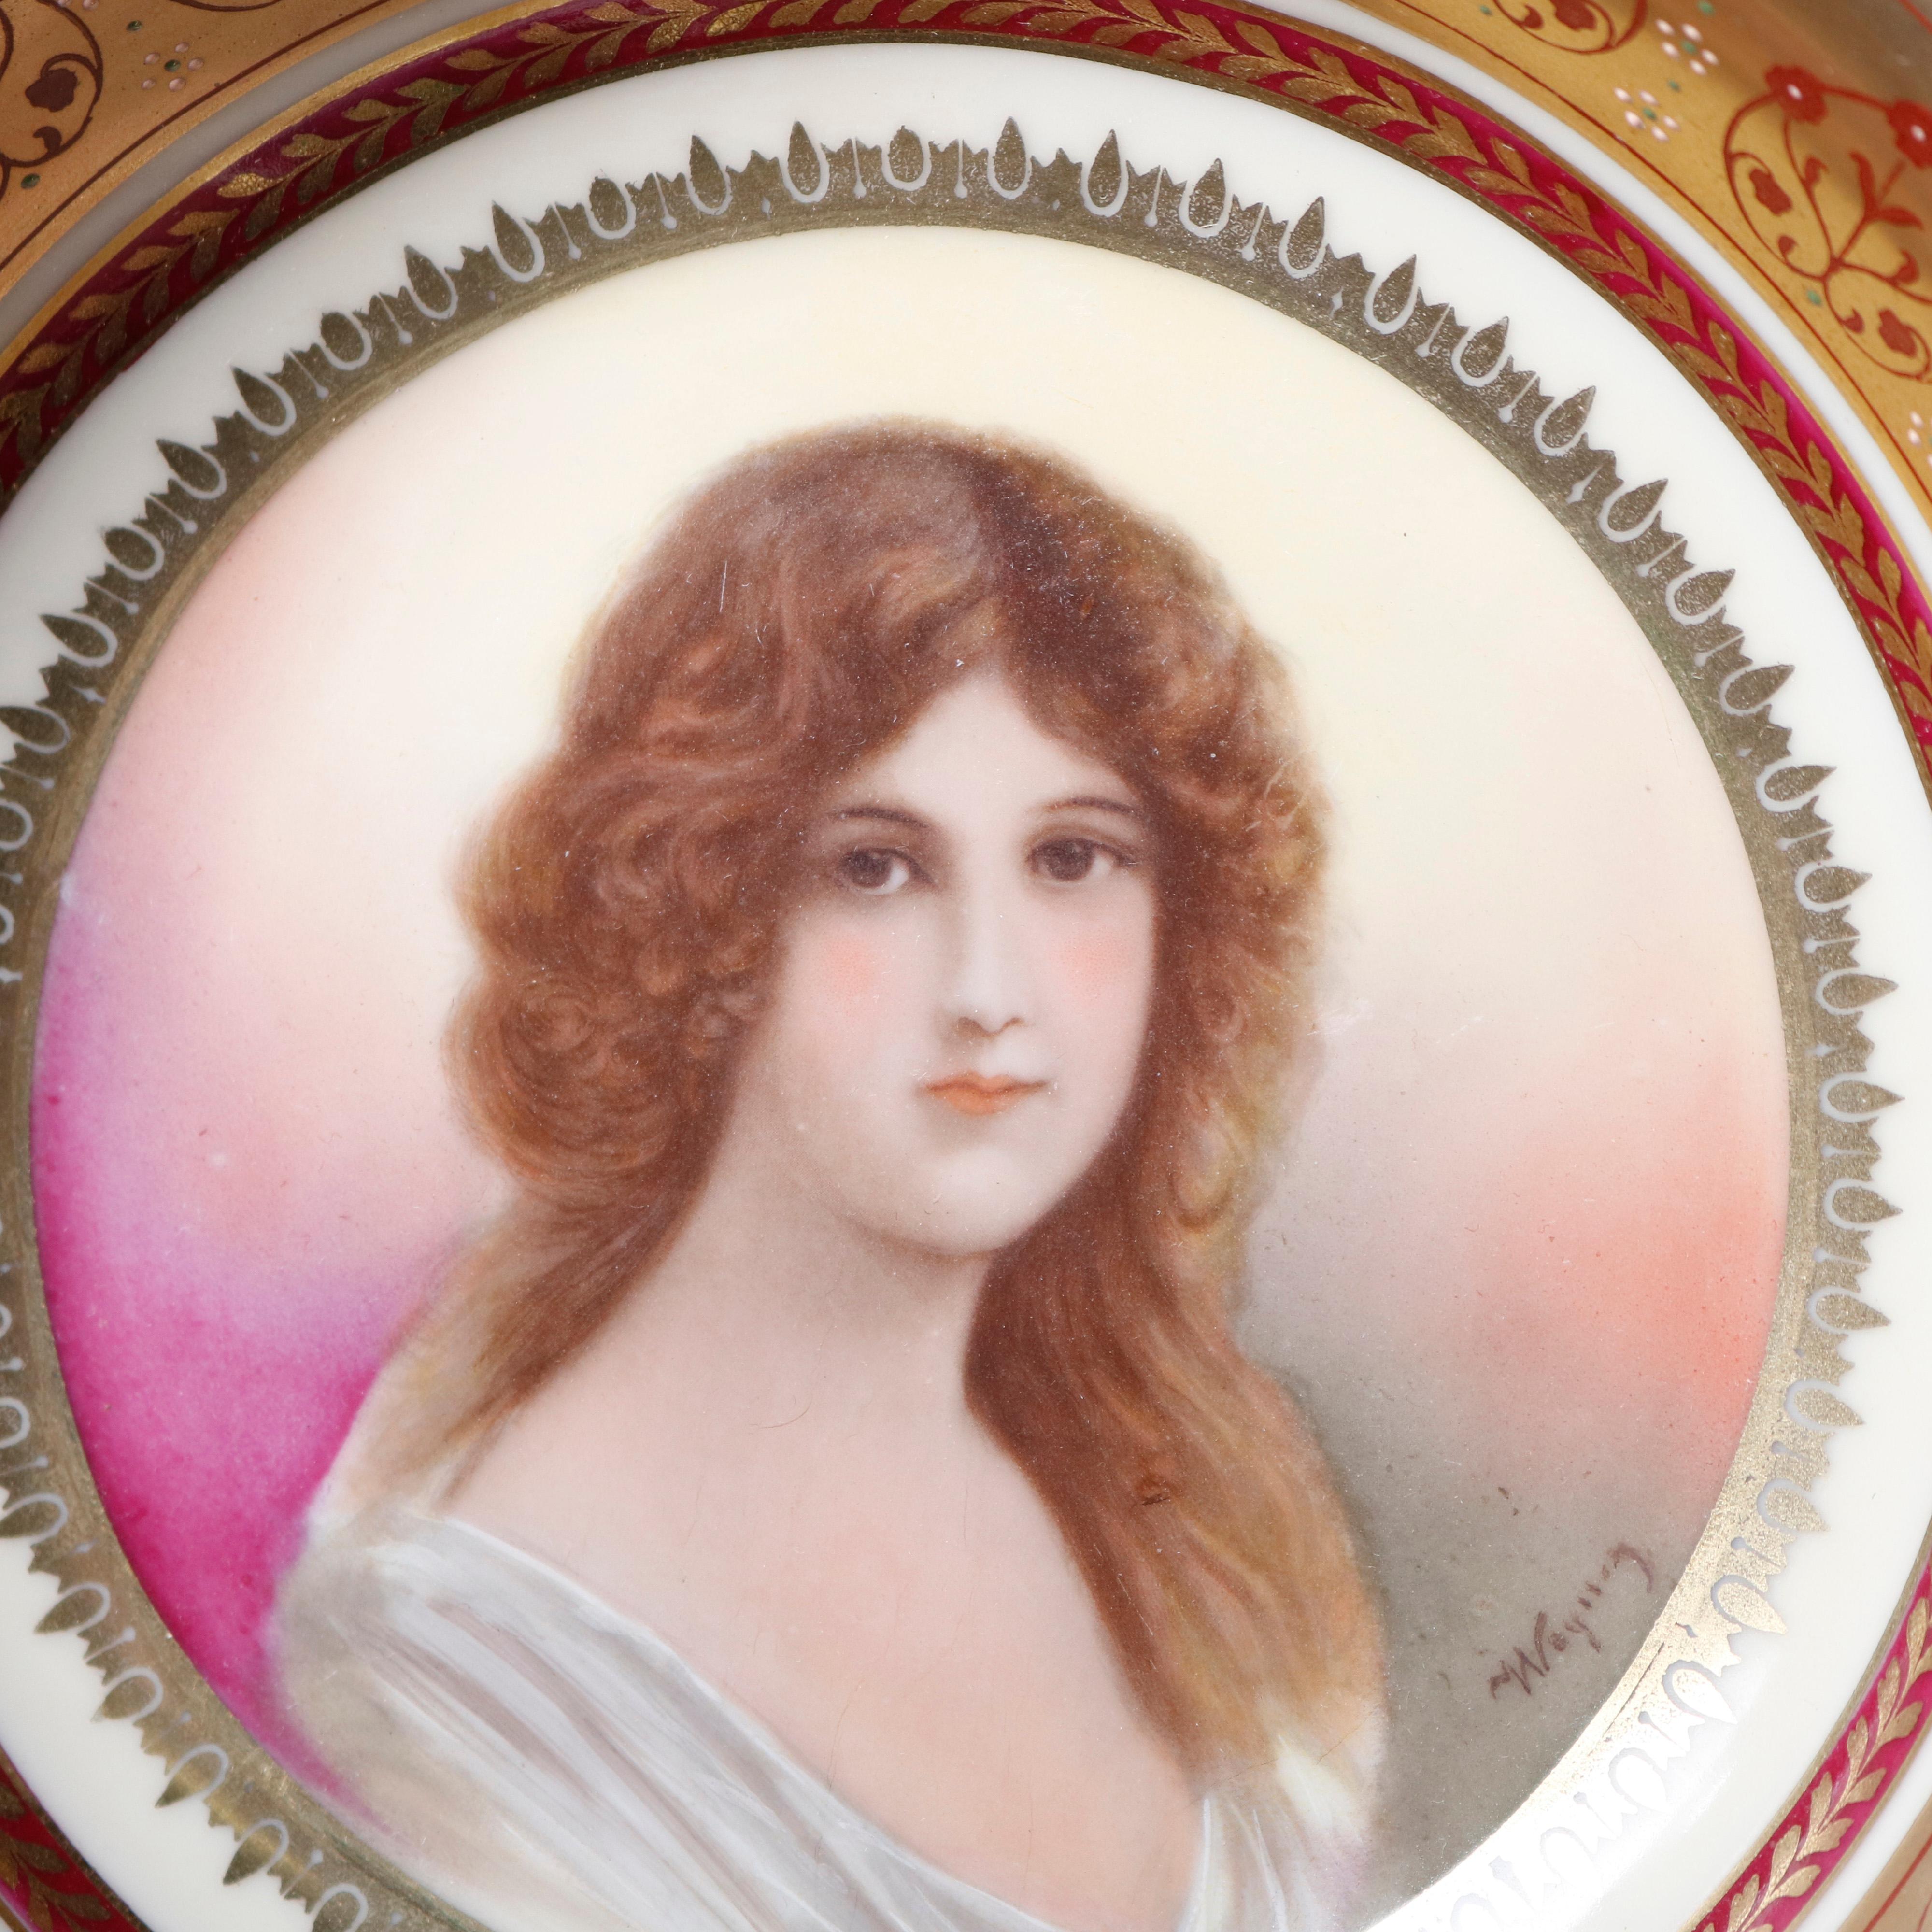 An antique Austrian Royal Vienna style porcelain bowl offers hand painted portrait of maiden, artist signed Wagner, rim with foliate decoration and laurel wreath reserves, gilt highlights throughout, en verso signed as photographed, circa